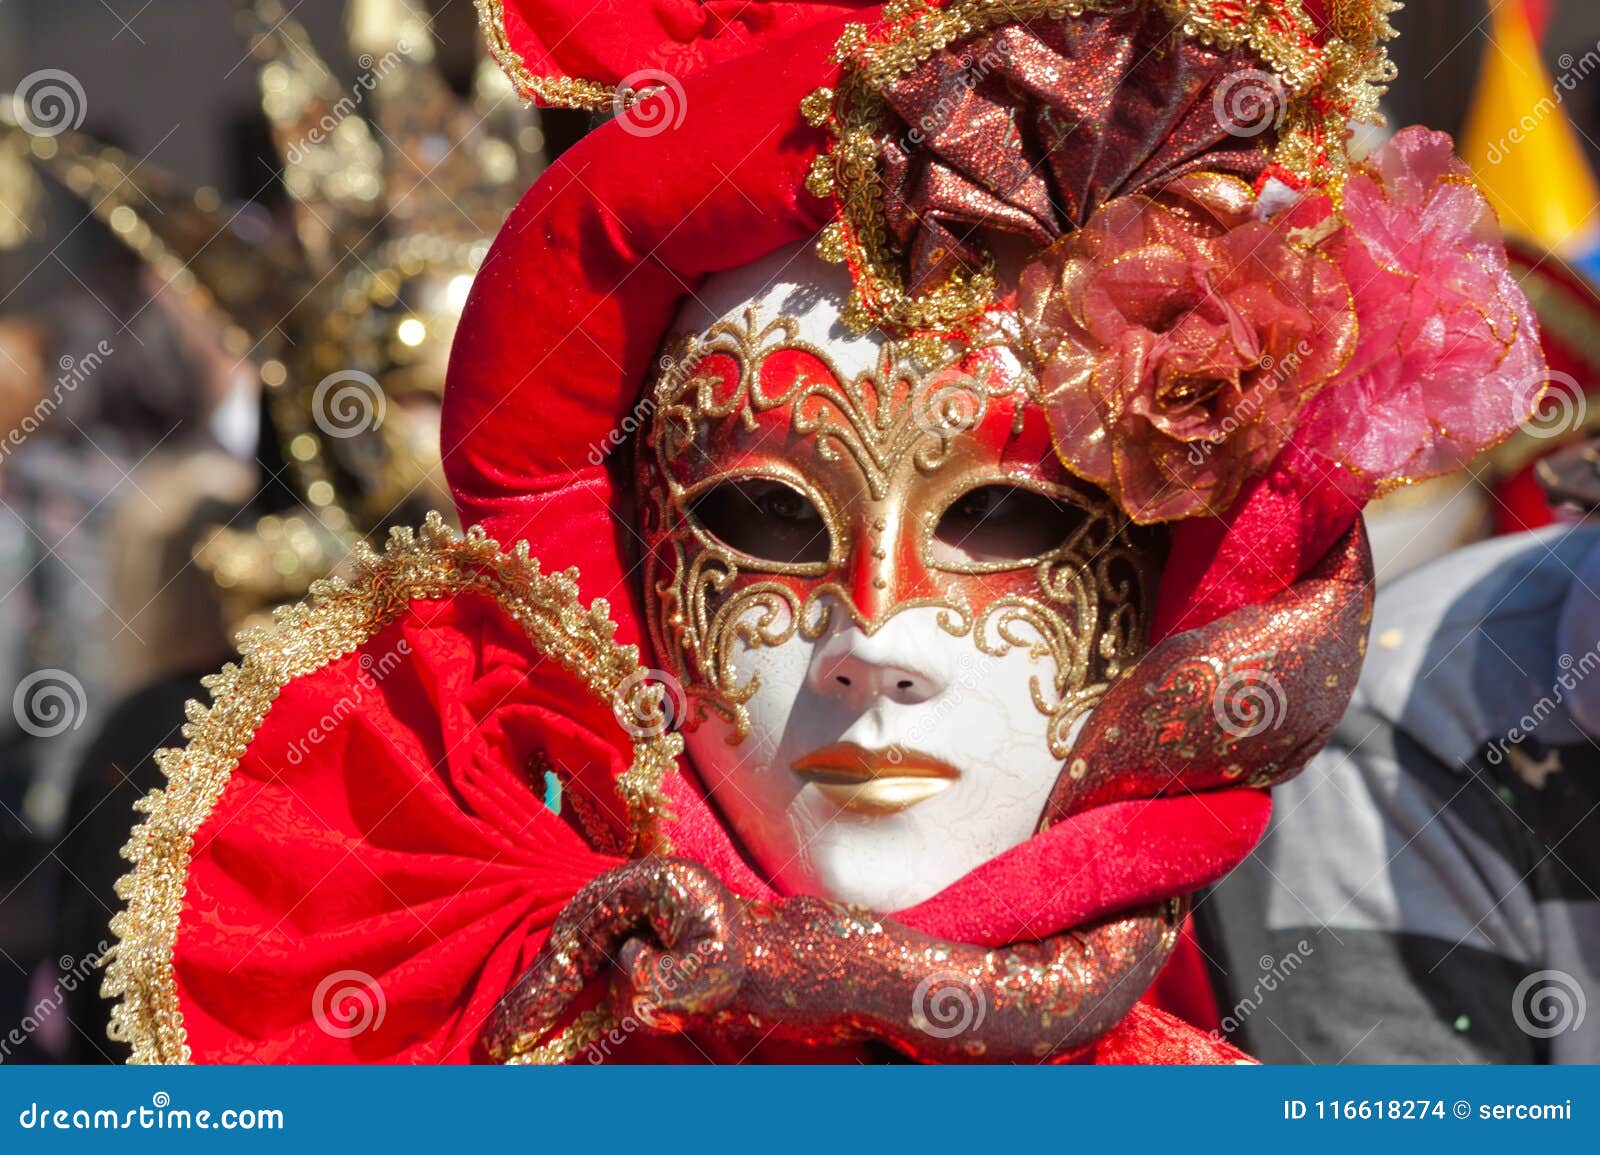 Red Mask in a Carnival Parade Stock Photo - Image of venezia, beauty ...